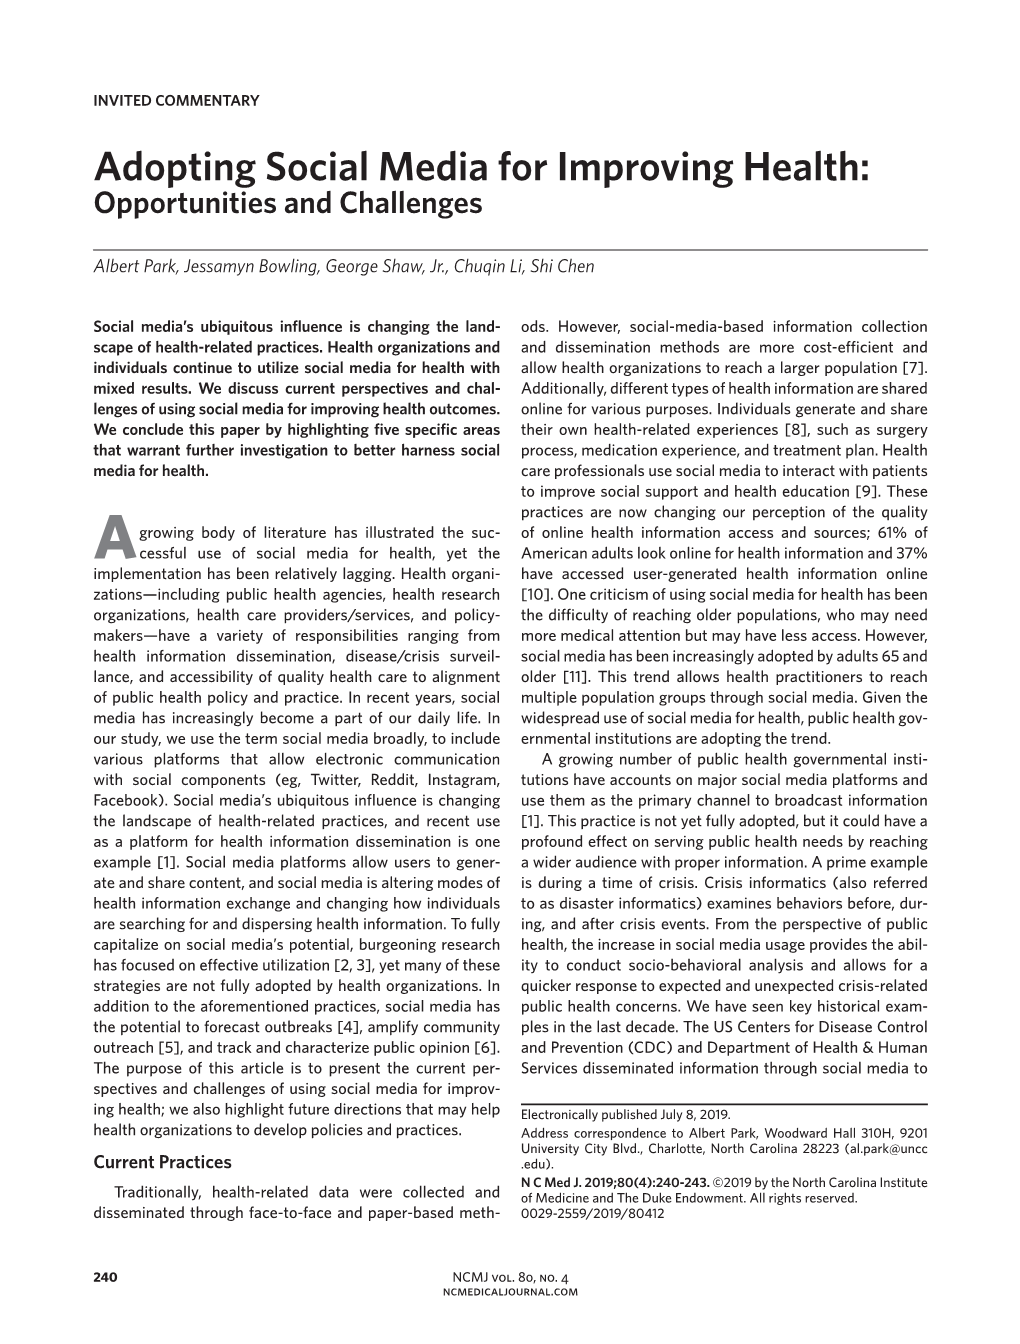 Adopting Social Media for Improving Health: Opportunities and Challenges